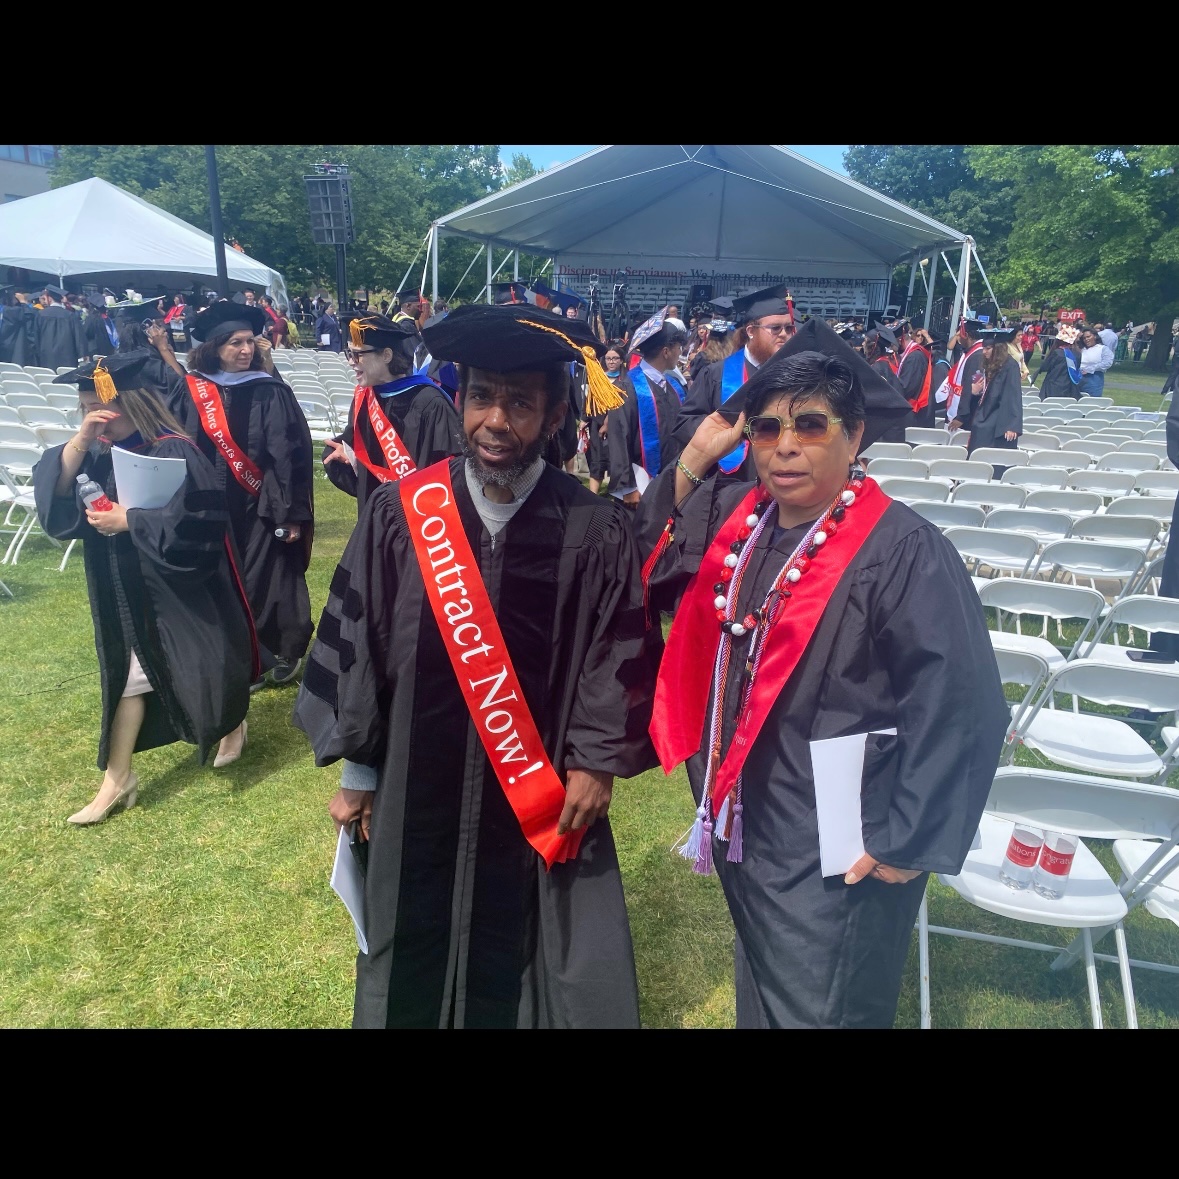 Congratulations to the class of 2024! 

[Students, faculty, staff at QC CUNY’s commencement wear sashes with messages like “Open the gates,” “Don’t fire professors,” and “Contract now!”]

#AgainstAusterity #CareNotCuts #FixCUNY #FundCUNY #InvestInCUNY #APeoplesCUNY #Red4HigherEd